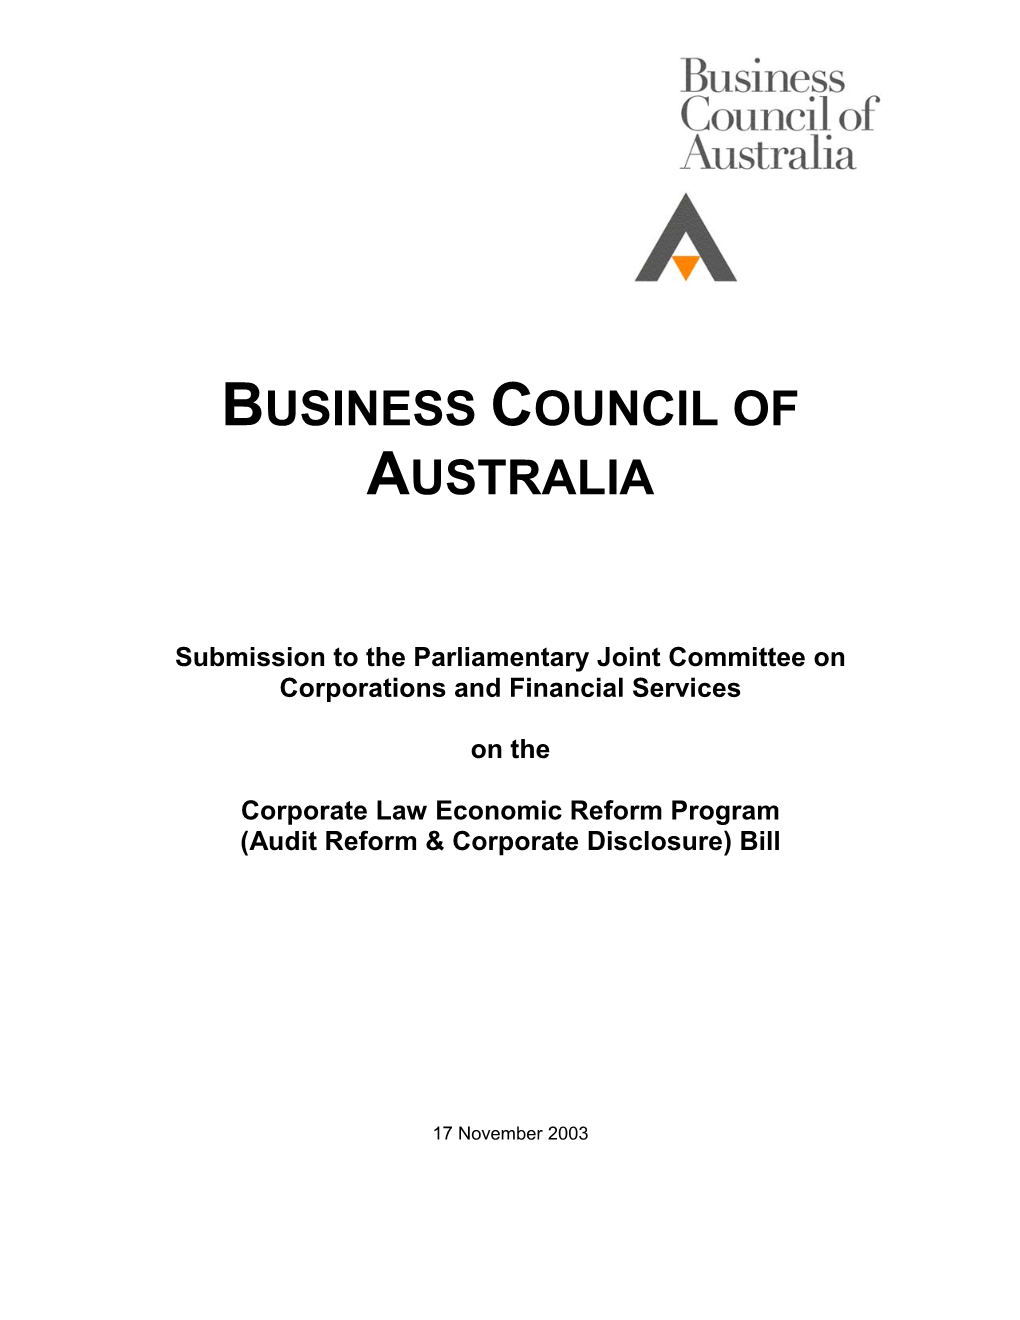 Submission to the Parliamentary Joint Committee on Corporations and Financial Services